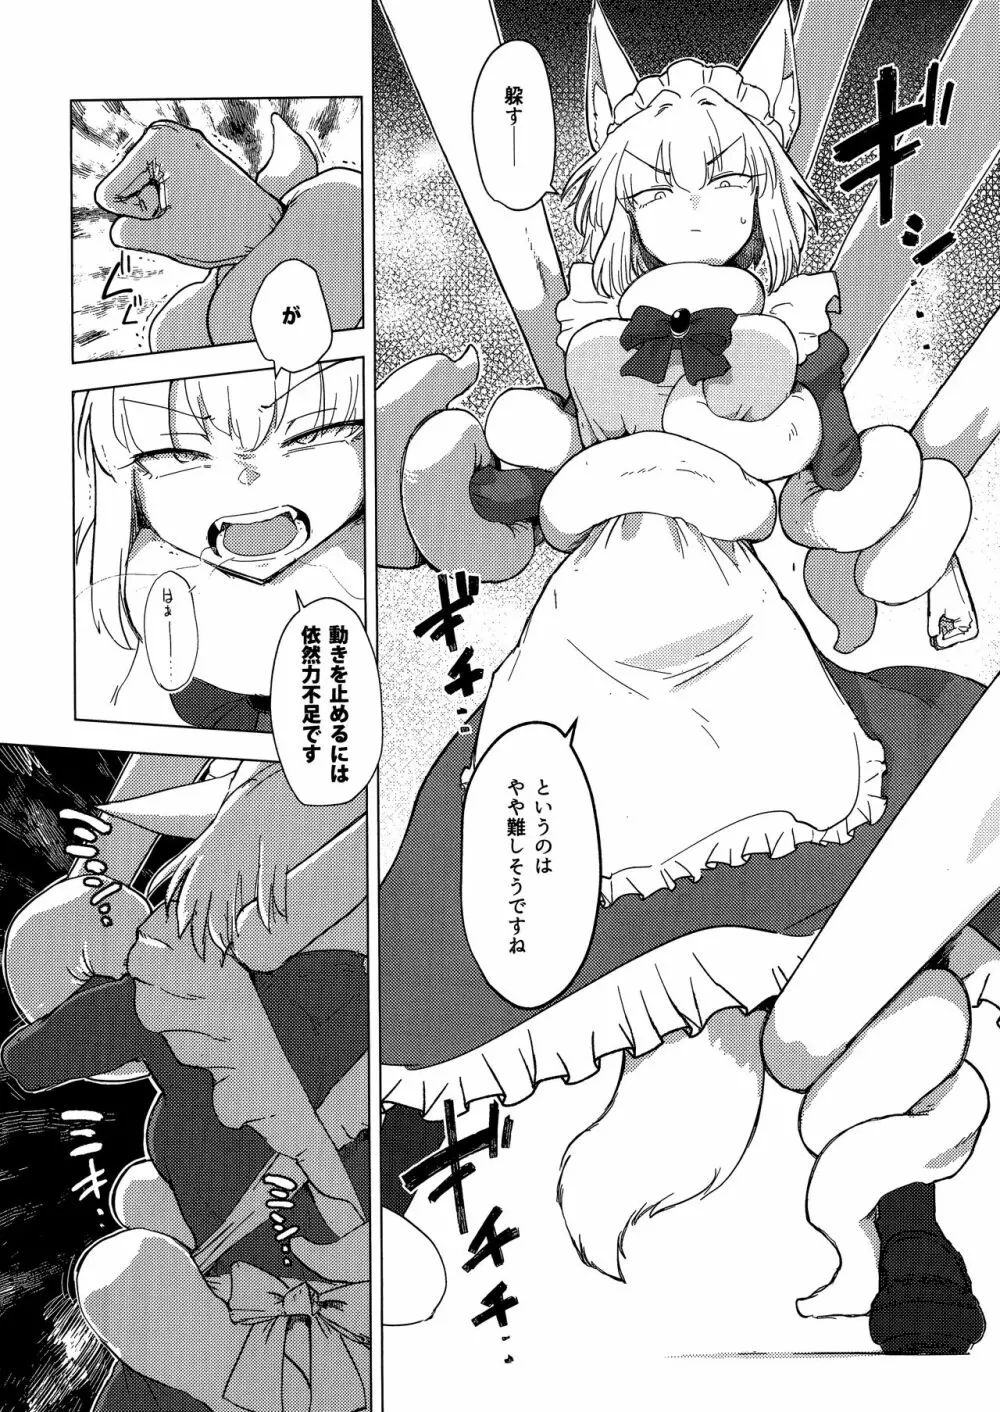 Wolf in sheep's clothing in Tentacles Page.11